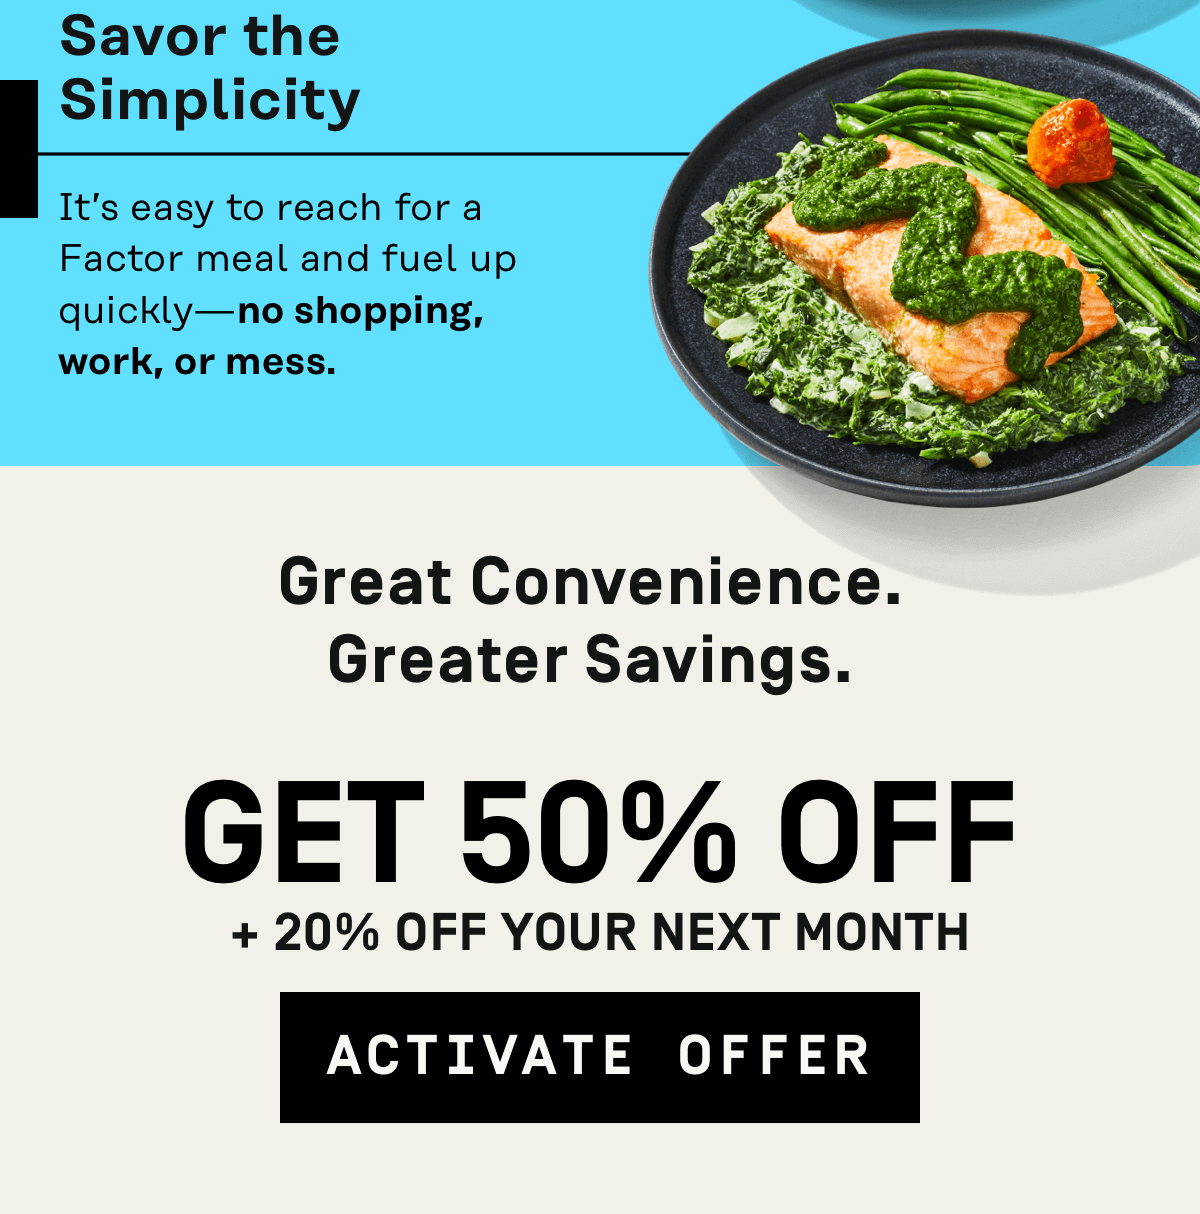 Great convenience, greater savings. Get 50% Off + 20% Off your next month | Activate Offer